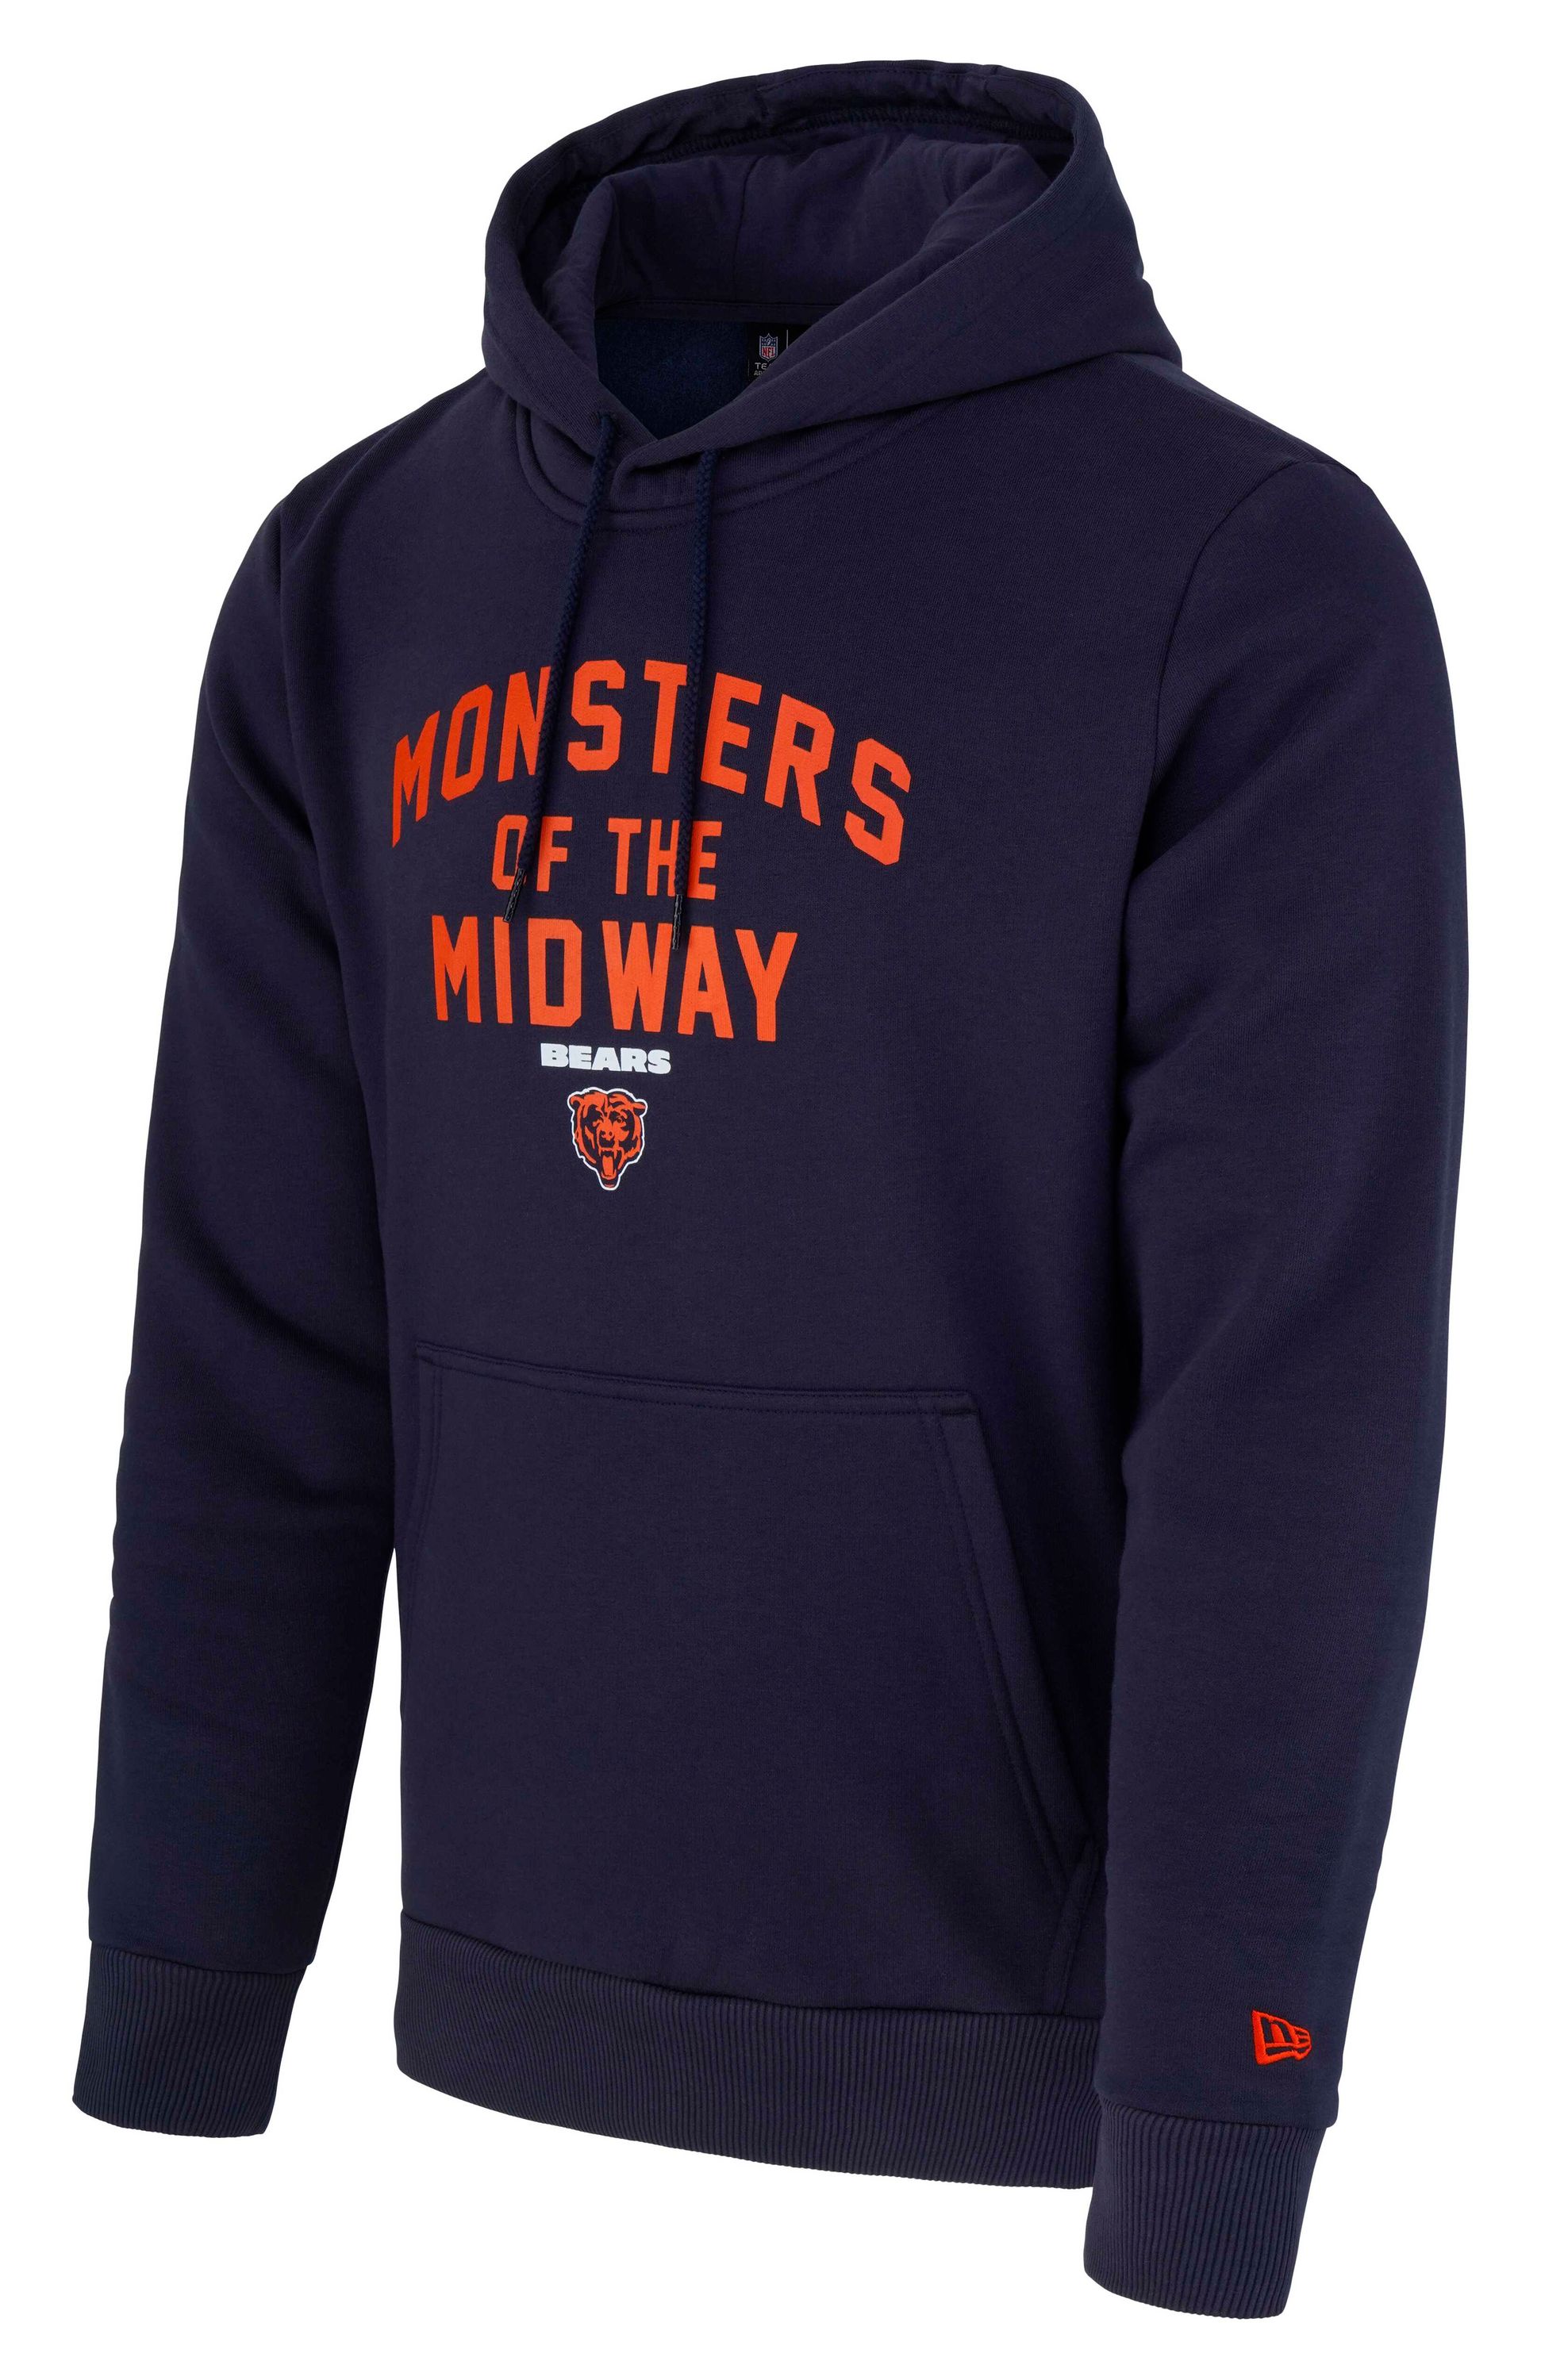 New Era - NFL Chicago Bears Monsters of the Midway Hoodie